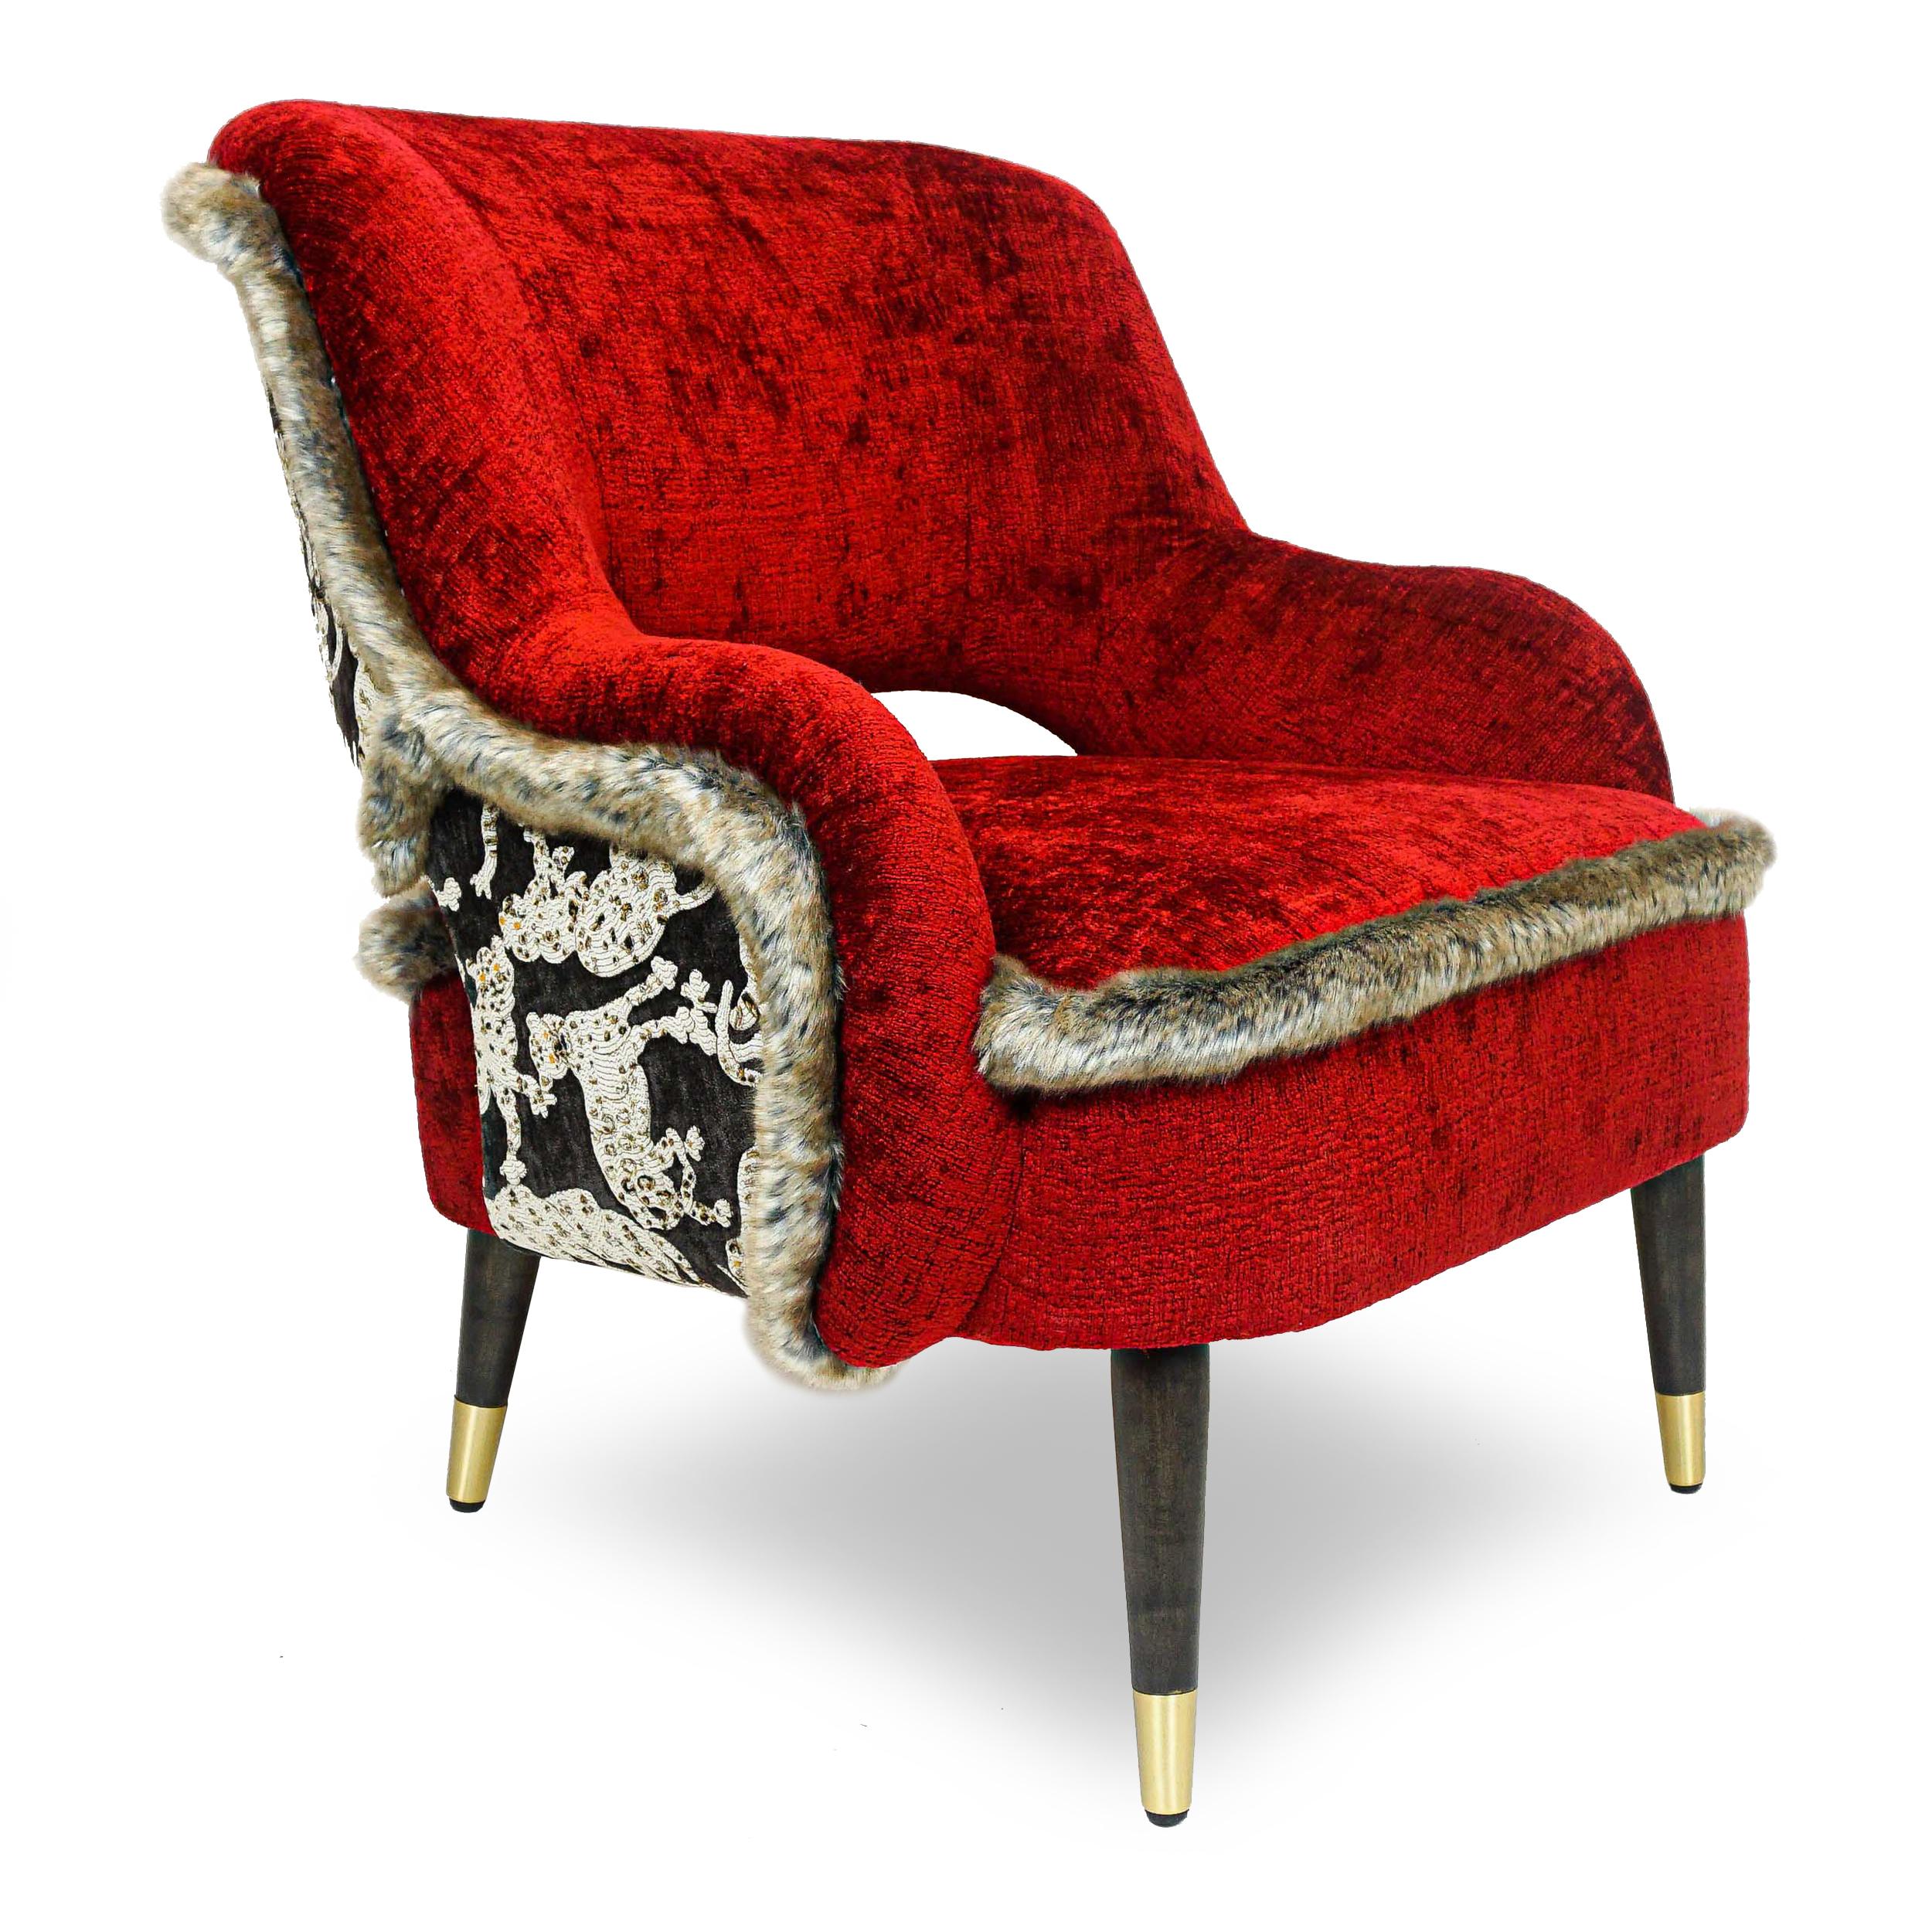 A maximalist combination of fabrics and materials make this chair indulgent and rich. A performance chenille in hot magma red with quilted cat on the outside back and trimmed with cinnamon-sugar colored faux fur cover a solid hard maple frame. Tight